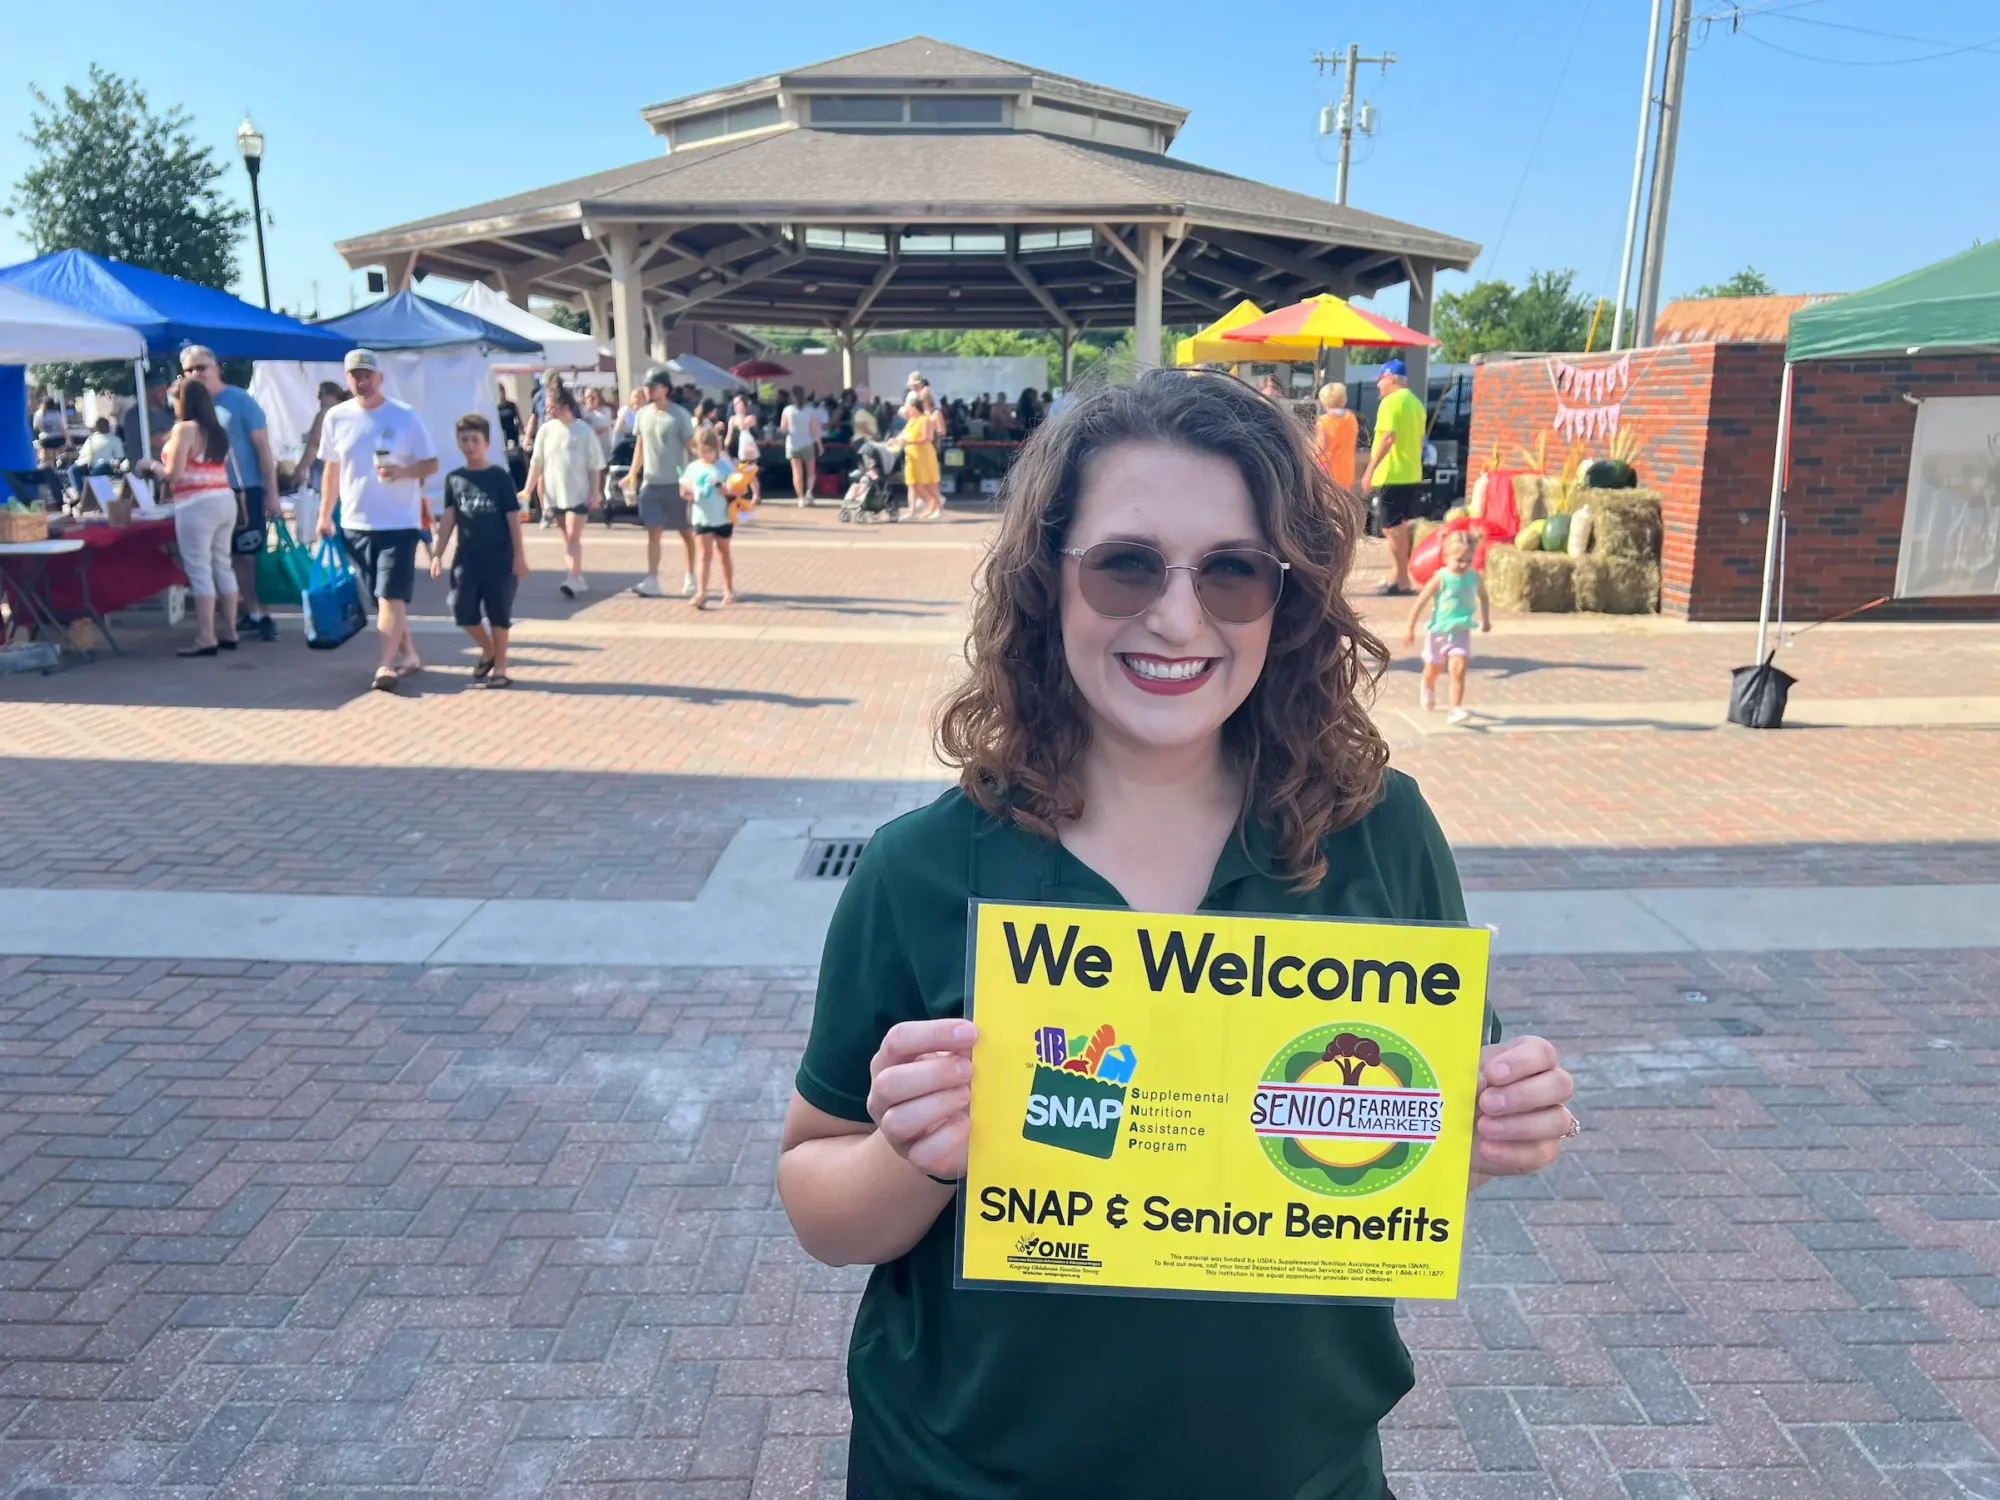 The Broken Arrow, OK Farmers Market manager holds up a yellow sign that says "We Welcome SNAP and Senior Benefits." The market, with it's tents and vendors, appears in the background.